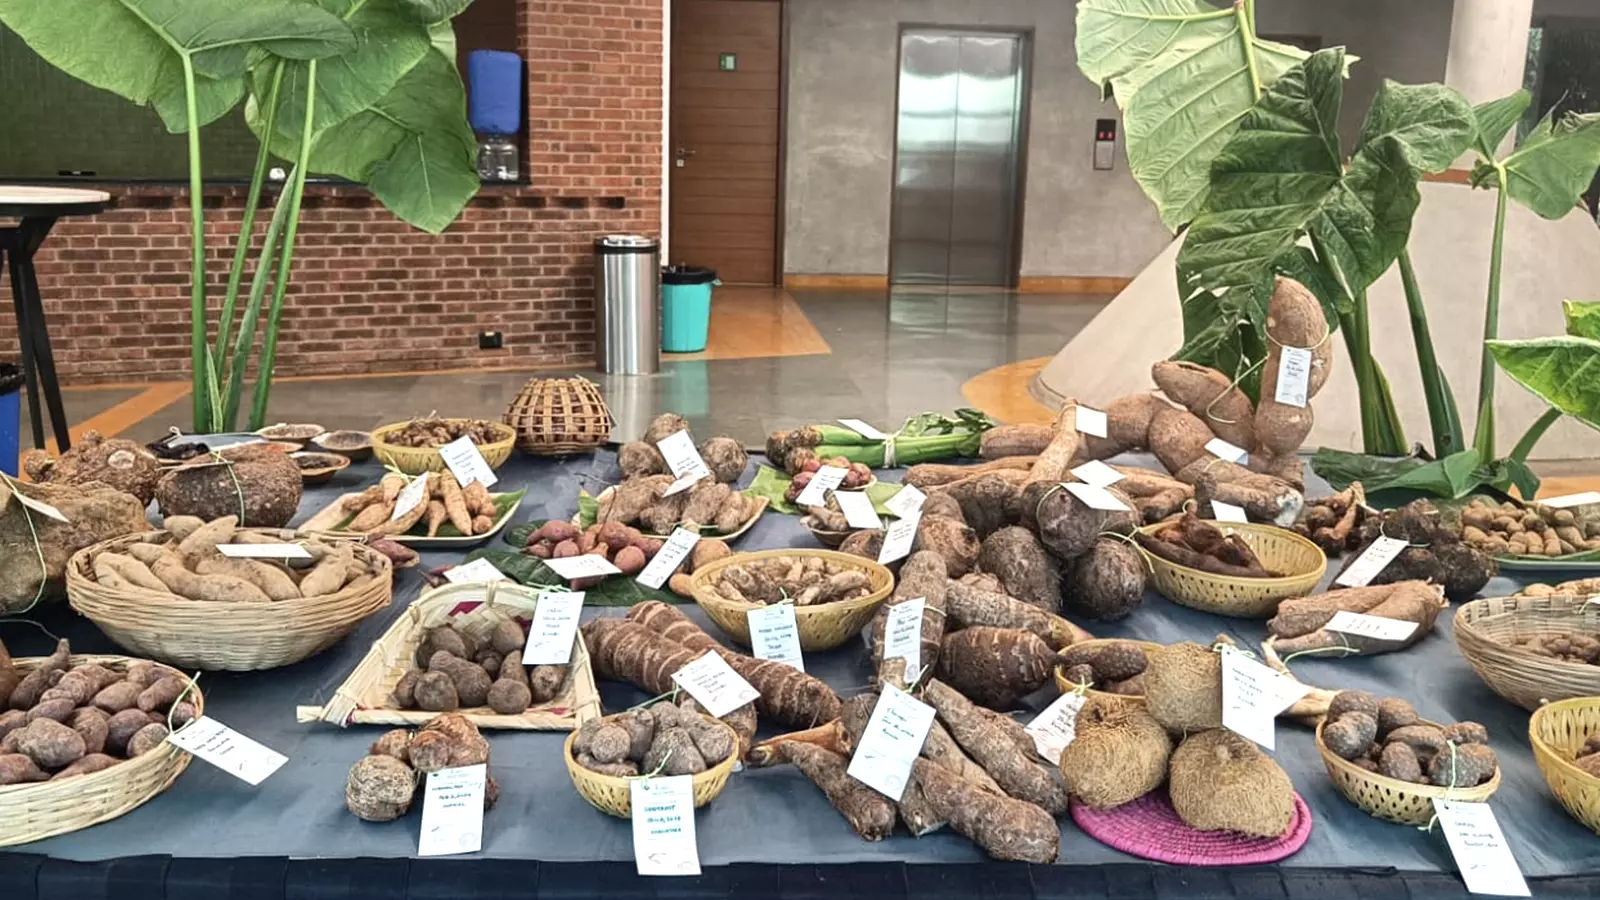 A table with tubers from across India was on display in Bengaluru.